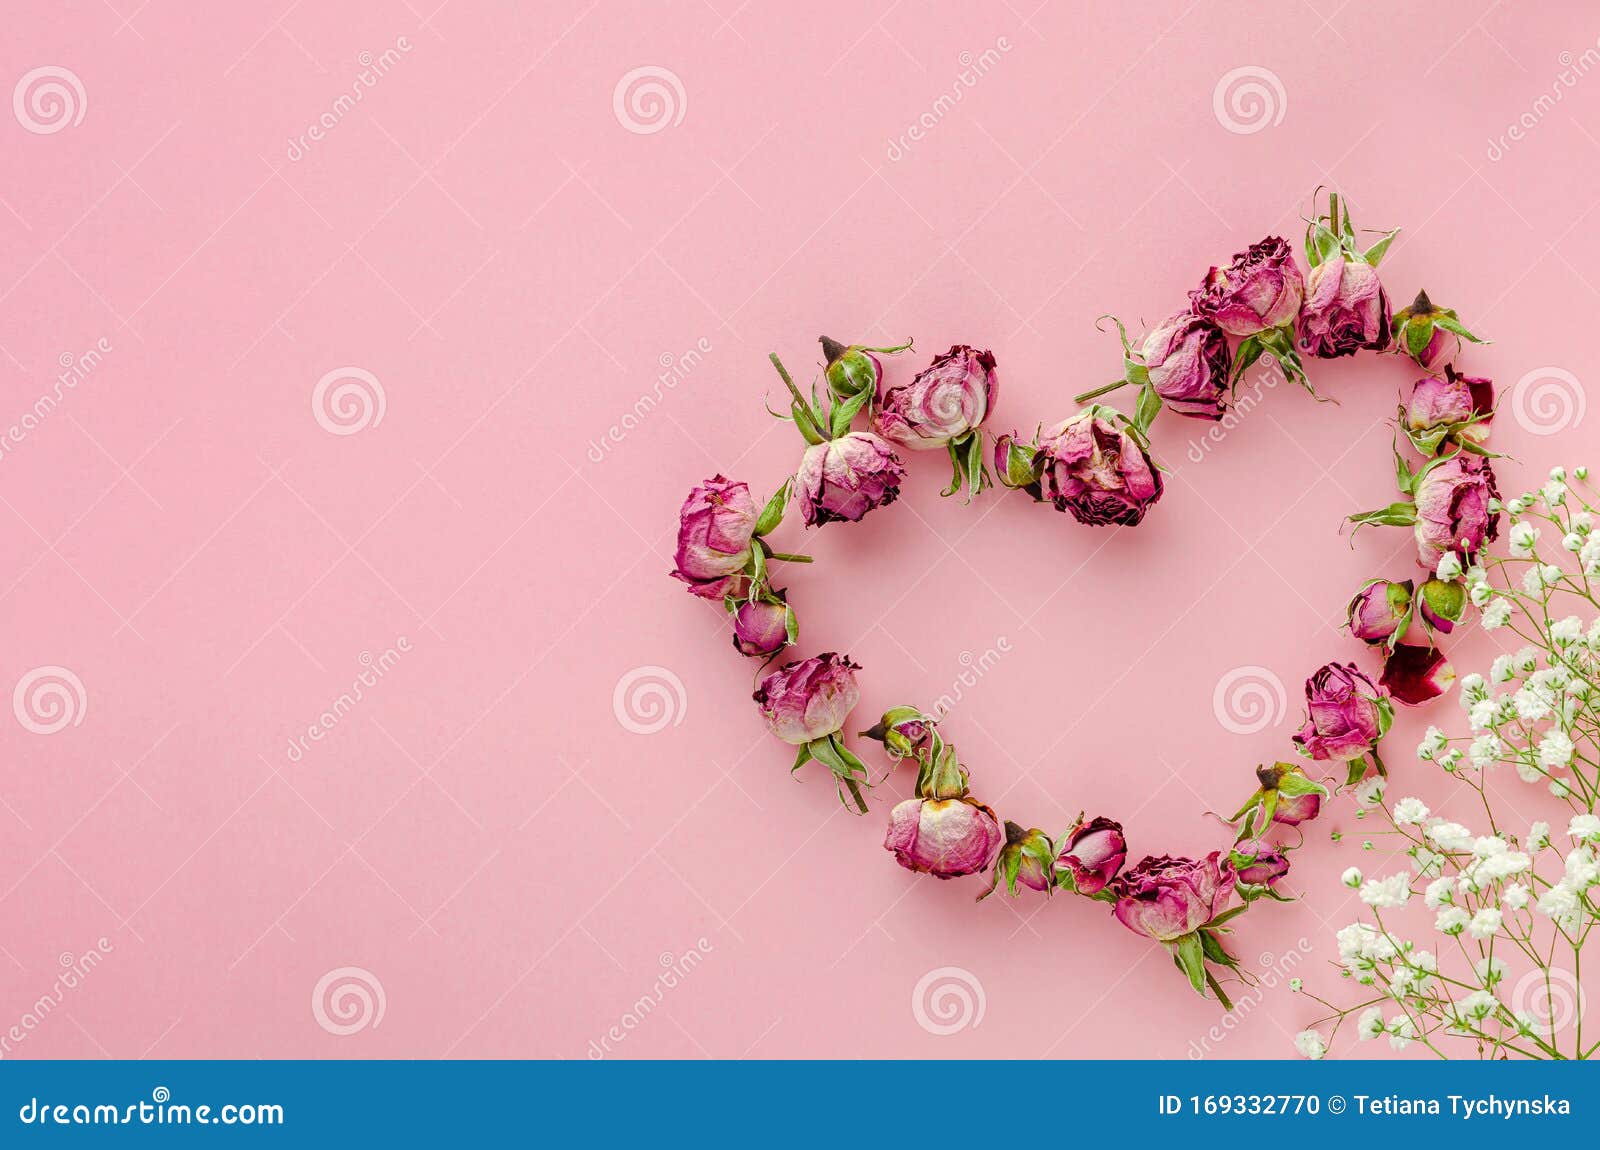 Heart Shape Made with Dried Roses and Decorated with Flowers on Pink ...